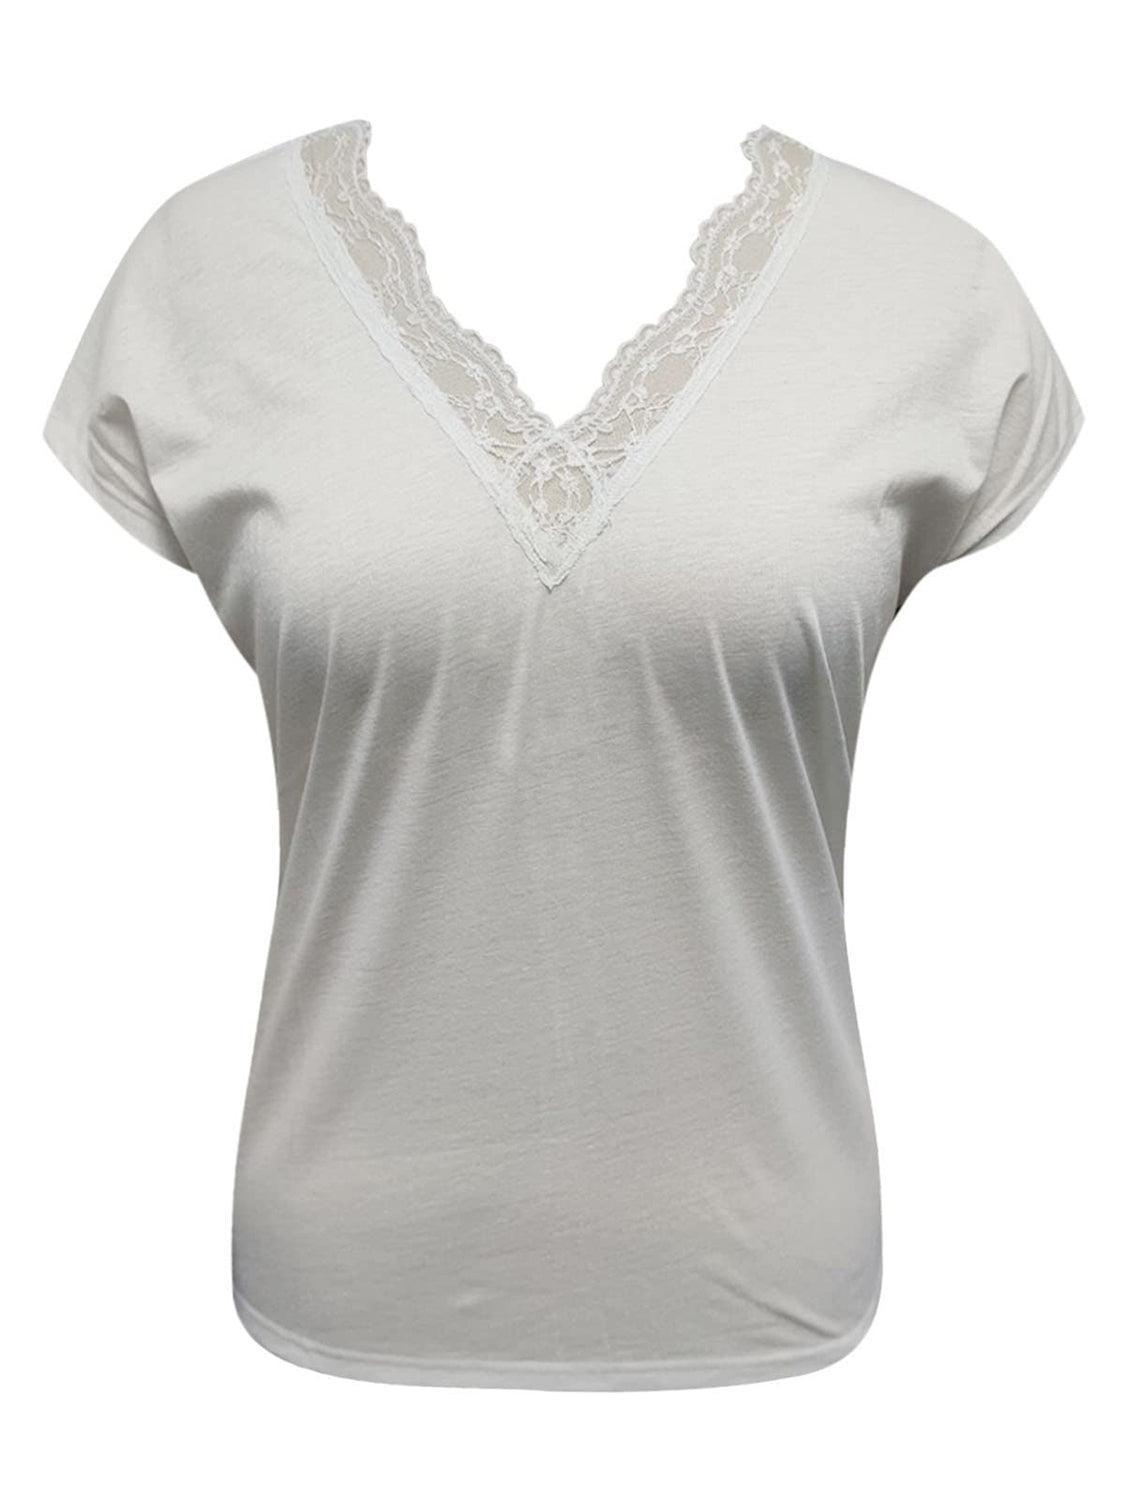 a women's white shirt with a lace trim